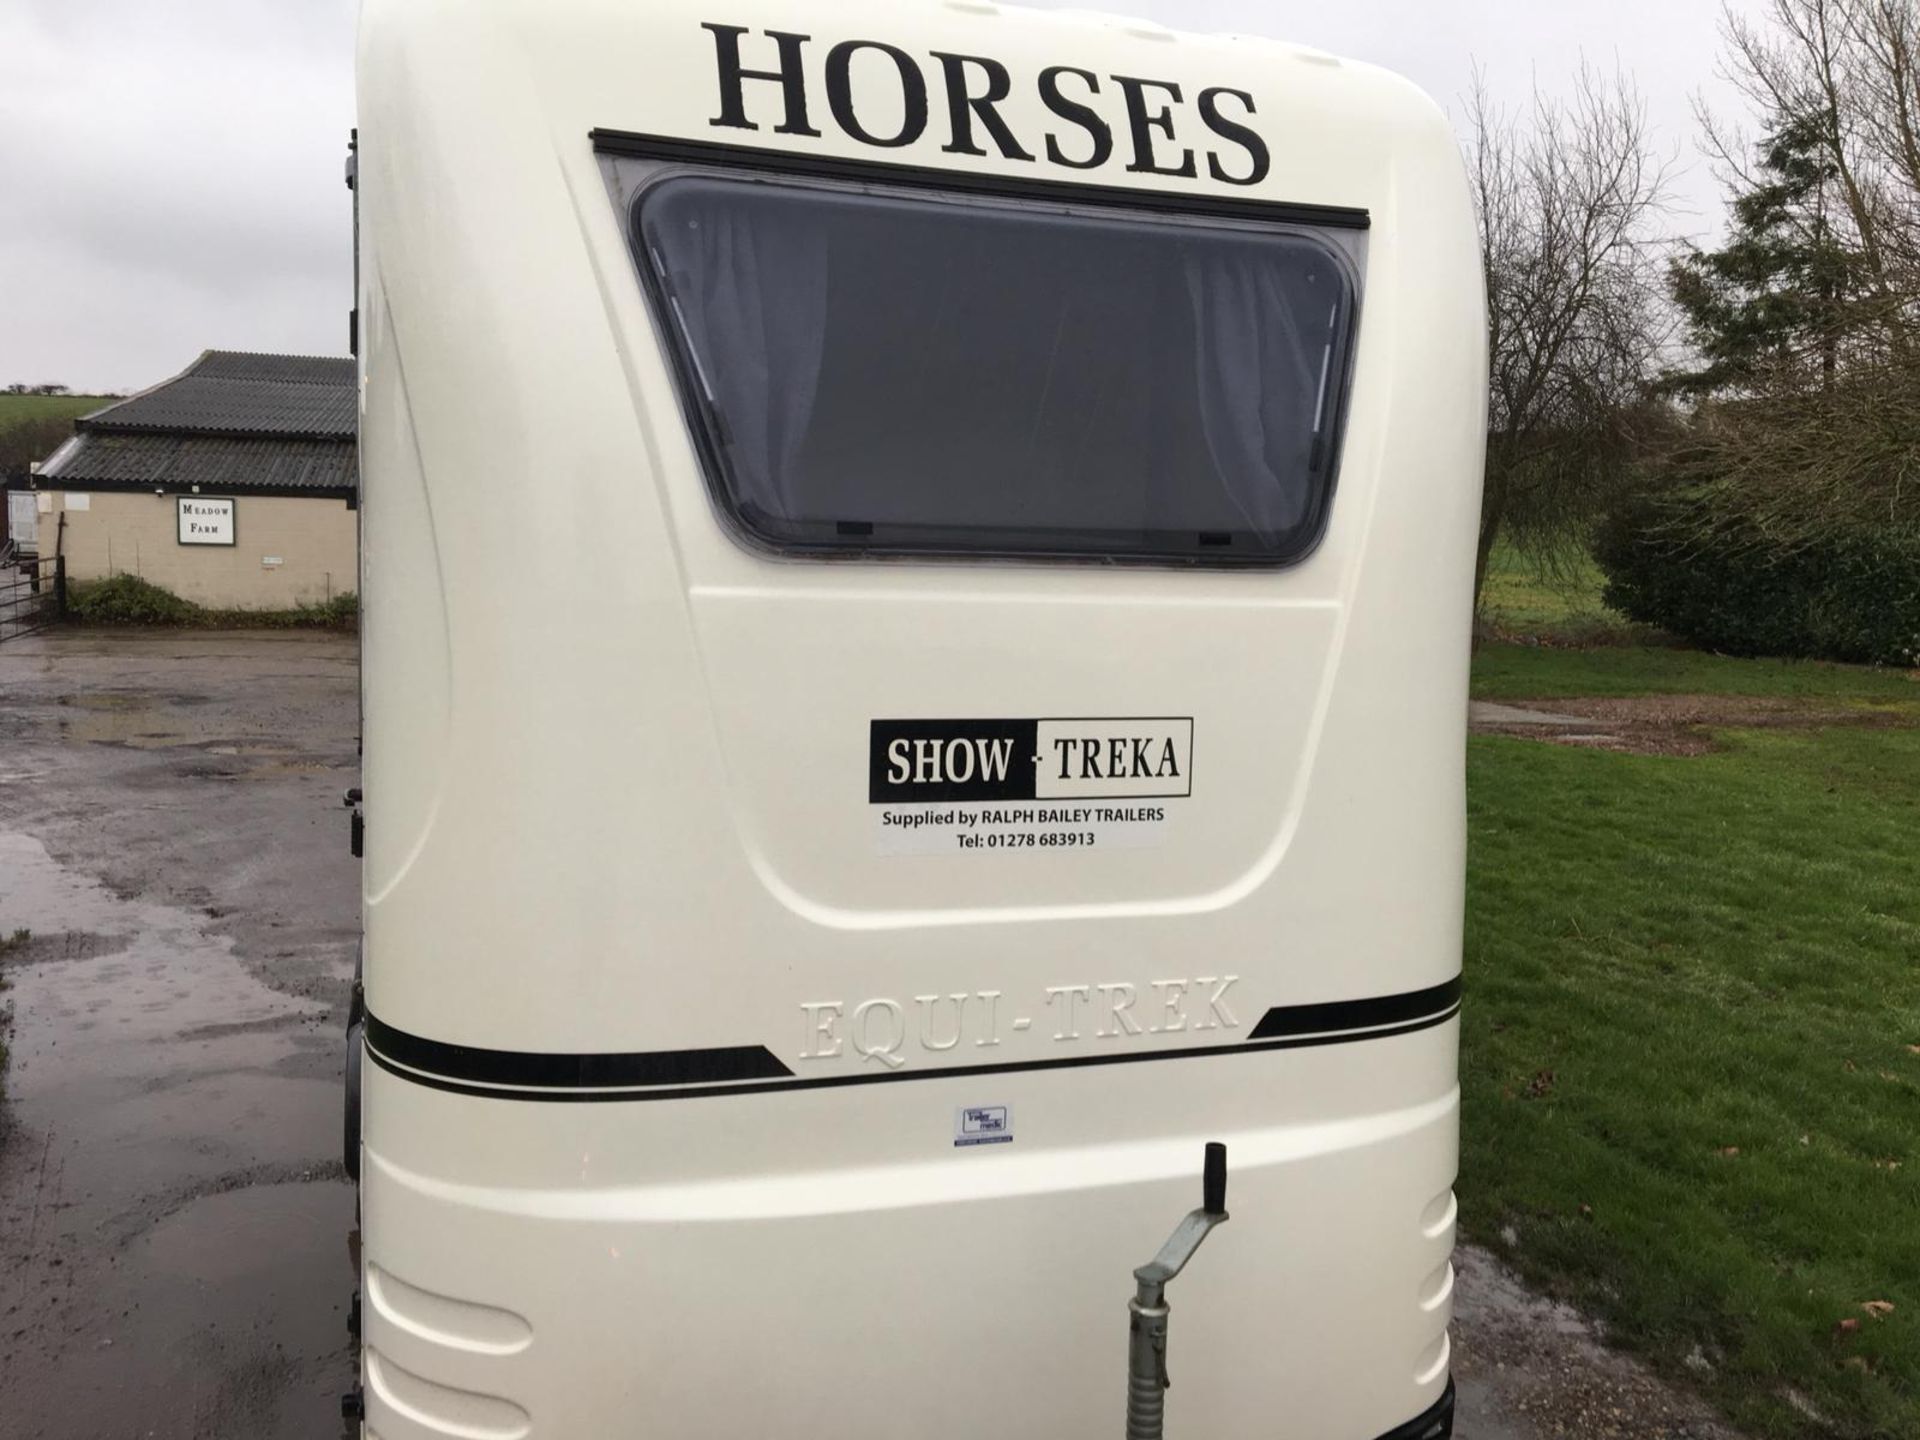 2011 SHOW TREKA M TWIN AXLE 2.6T HORSE BOX TRAILER WITH BUNK BEDS IN THE FRONT *NO VAT* - Image 2 of 15